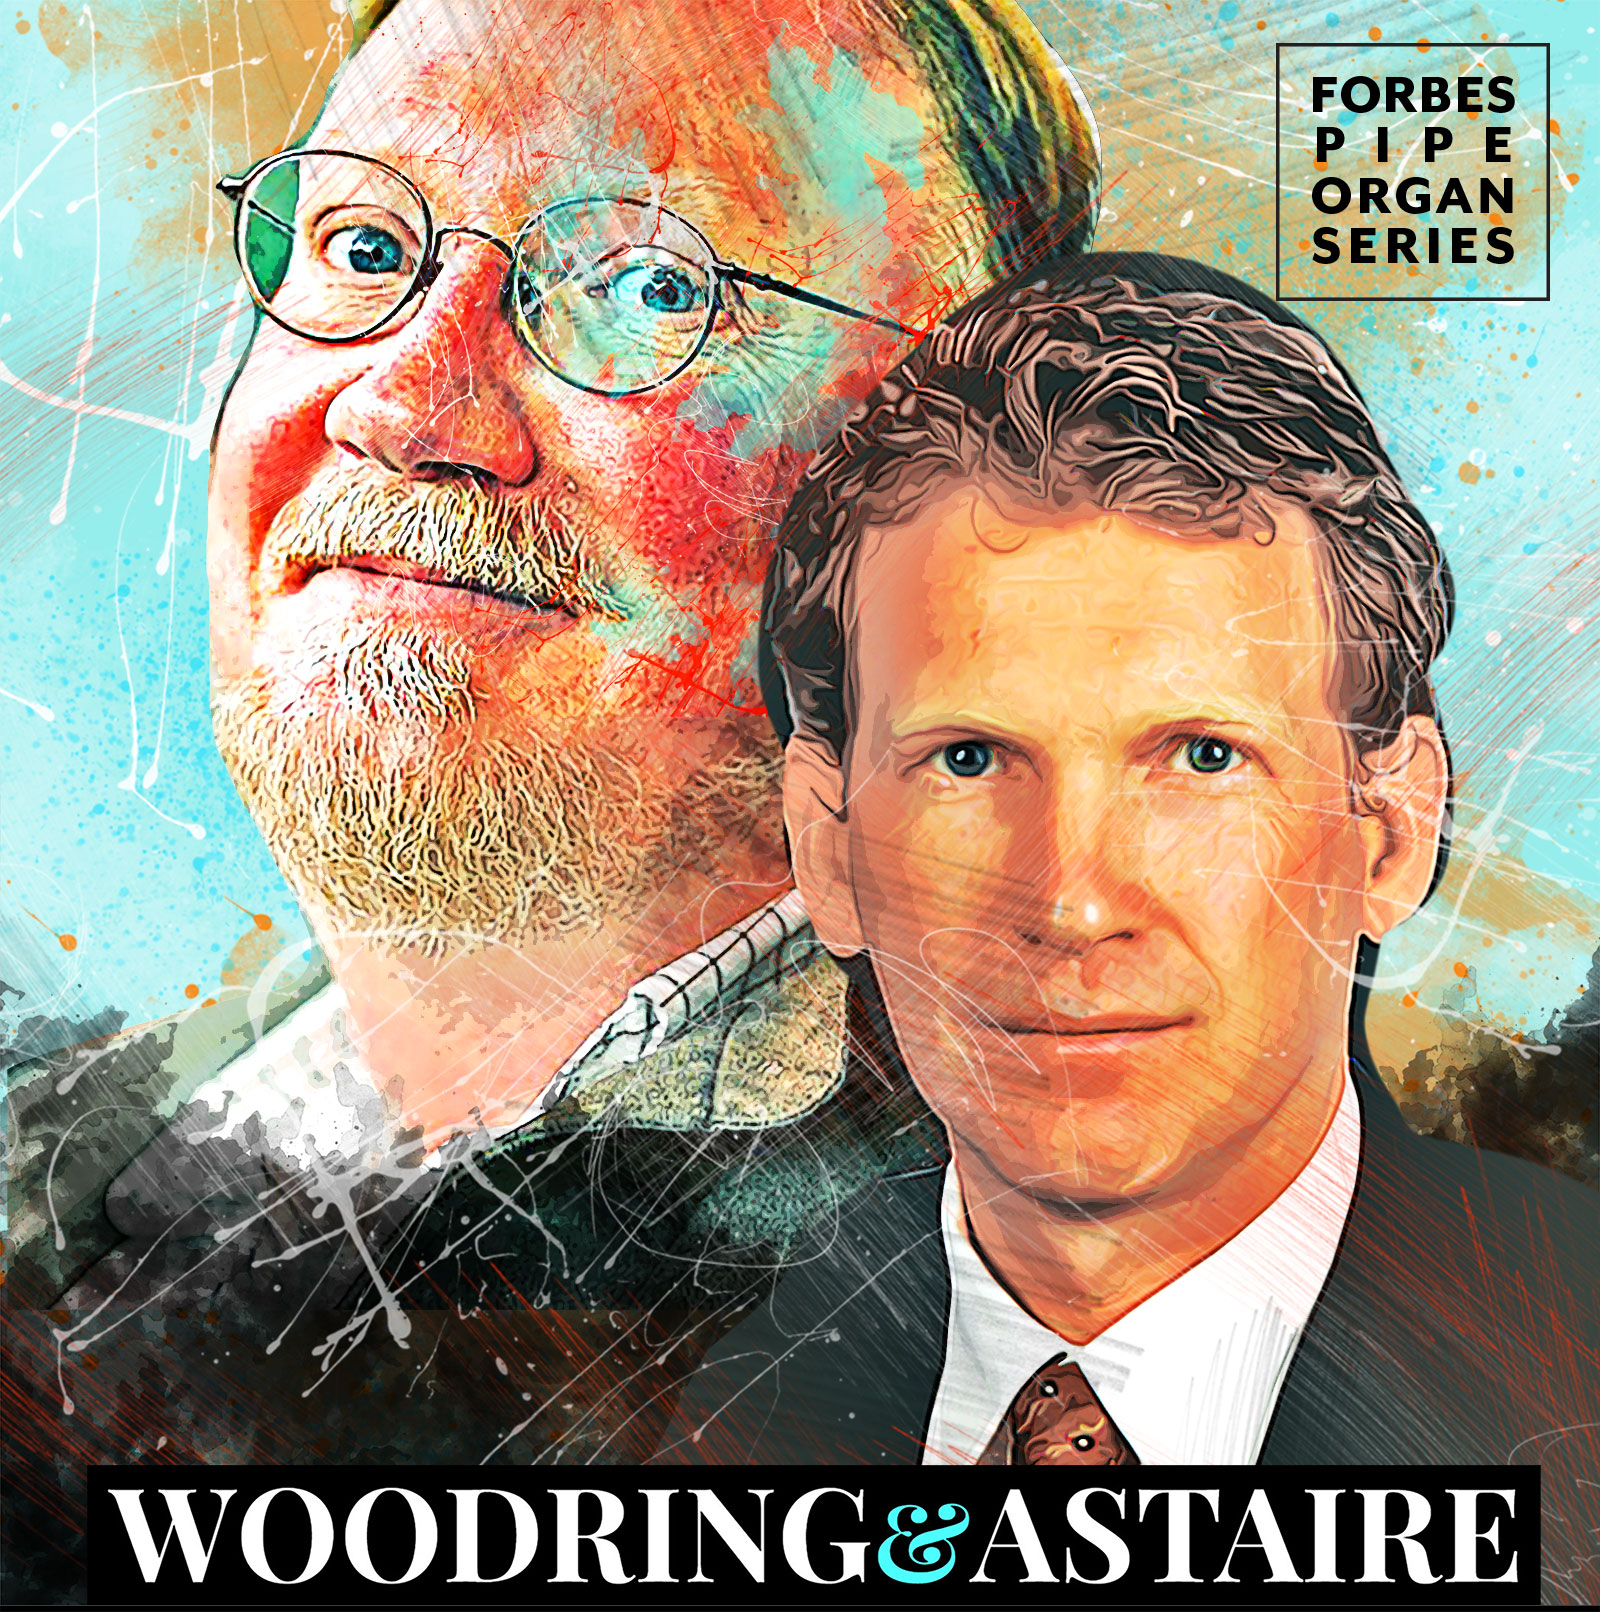 Forbes Pipe Organ Series with illustration of Paul Woodring and John Astaire